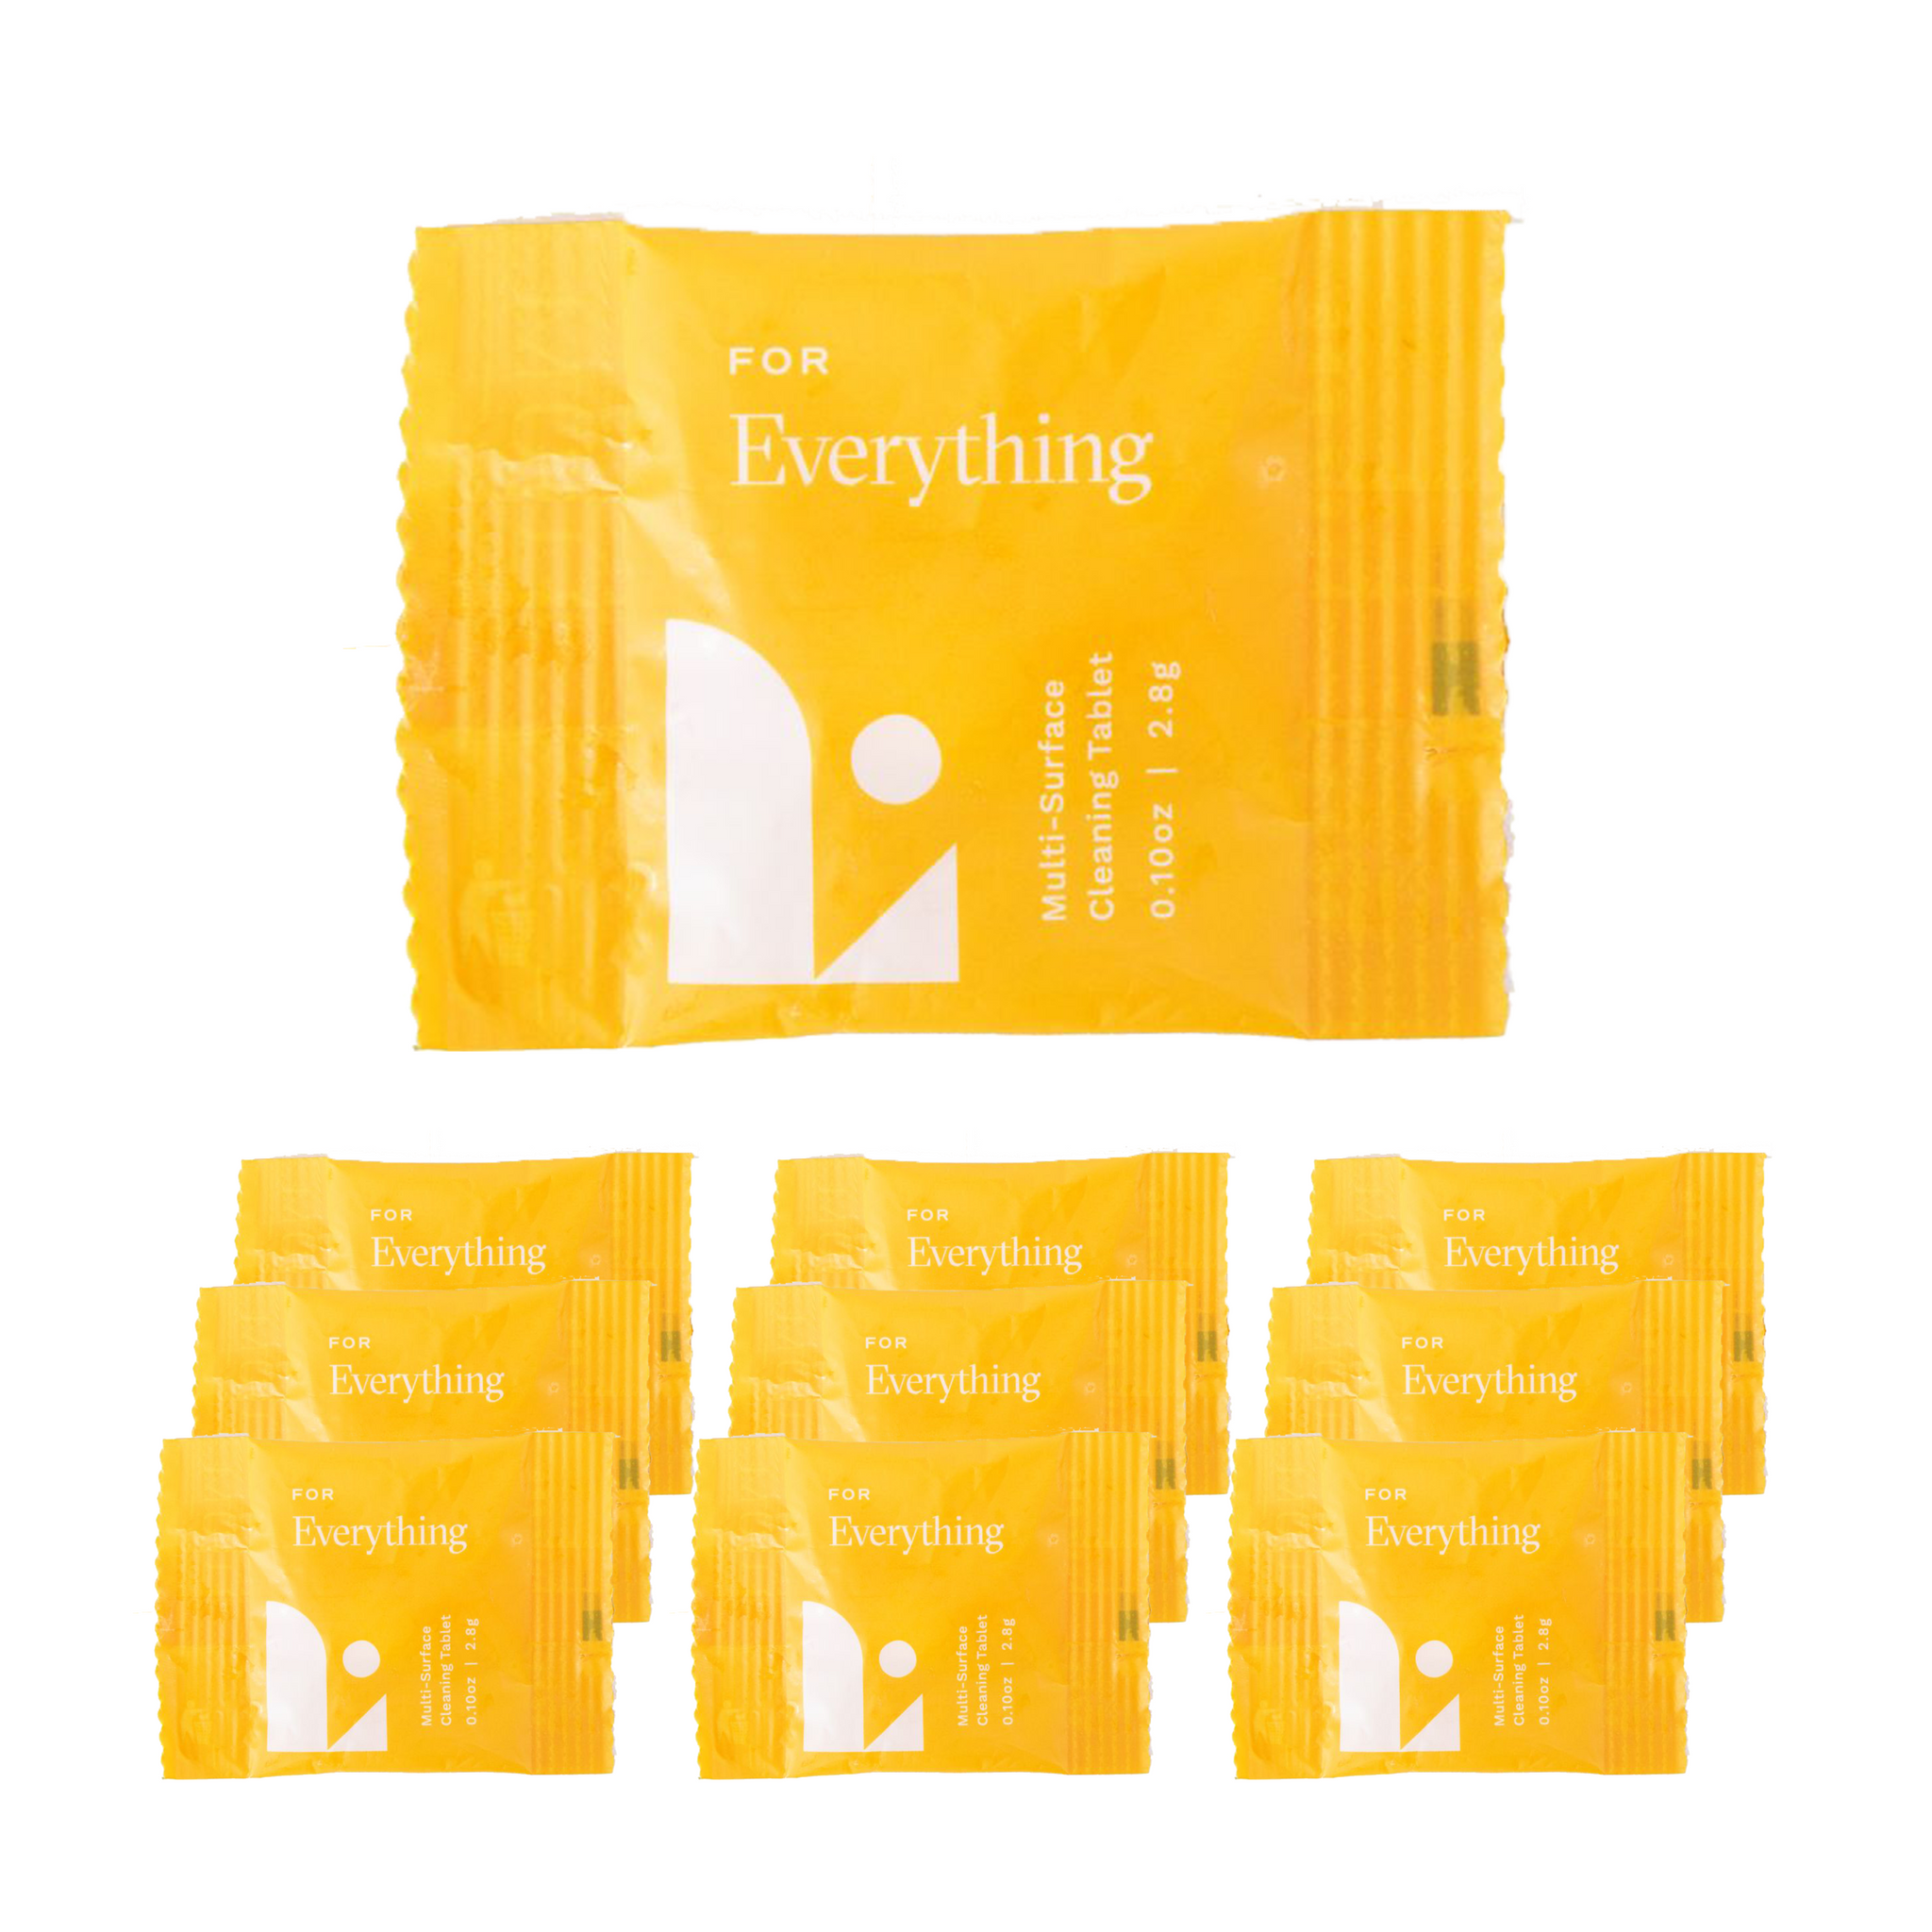 'For Everything' All Purpose Cleaner Tablet Refills